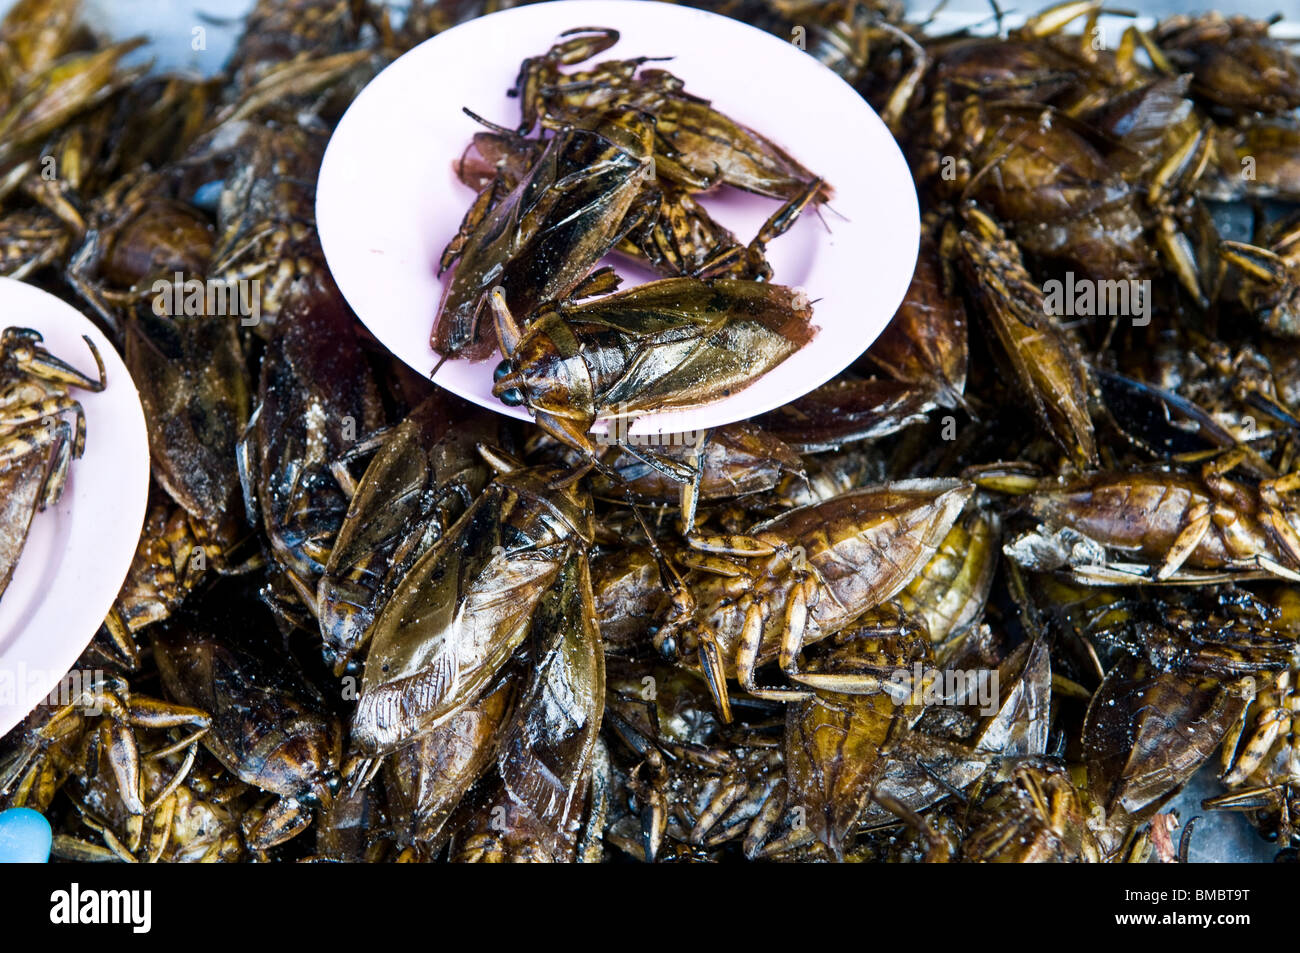 South east Asian snacks. fried bugs and insects are very popular in south east Asia. Stock Photo